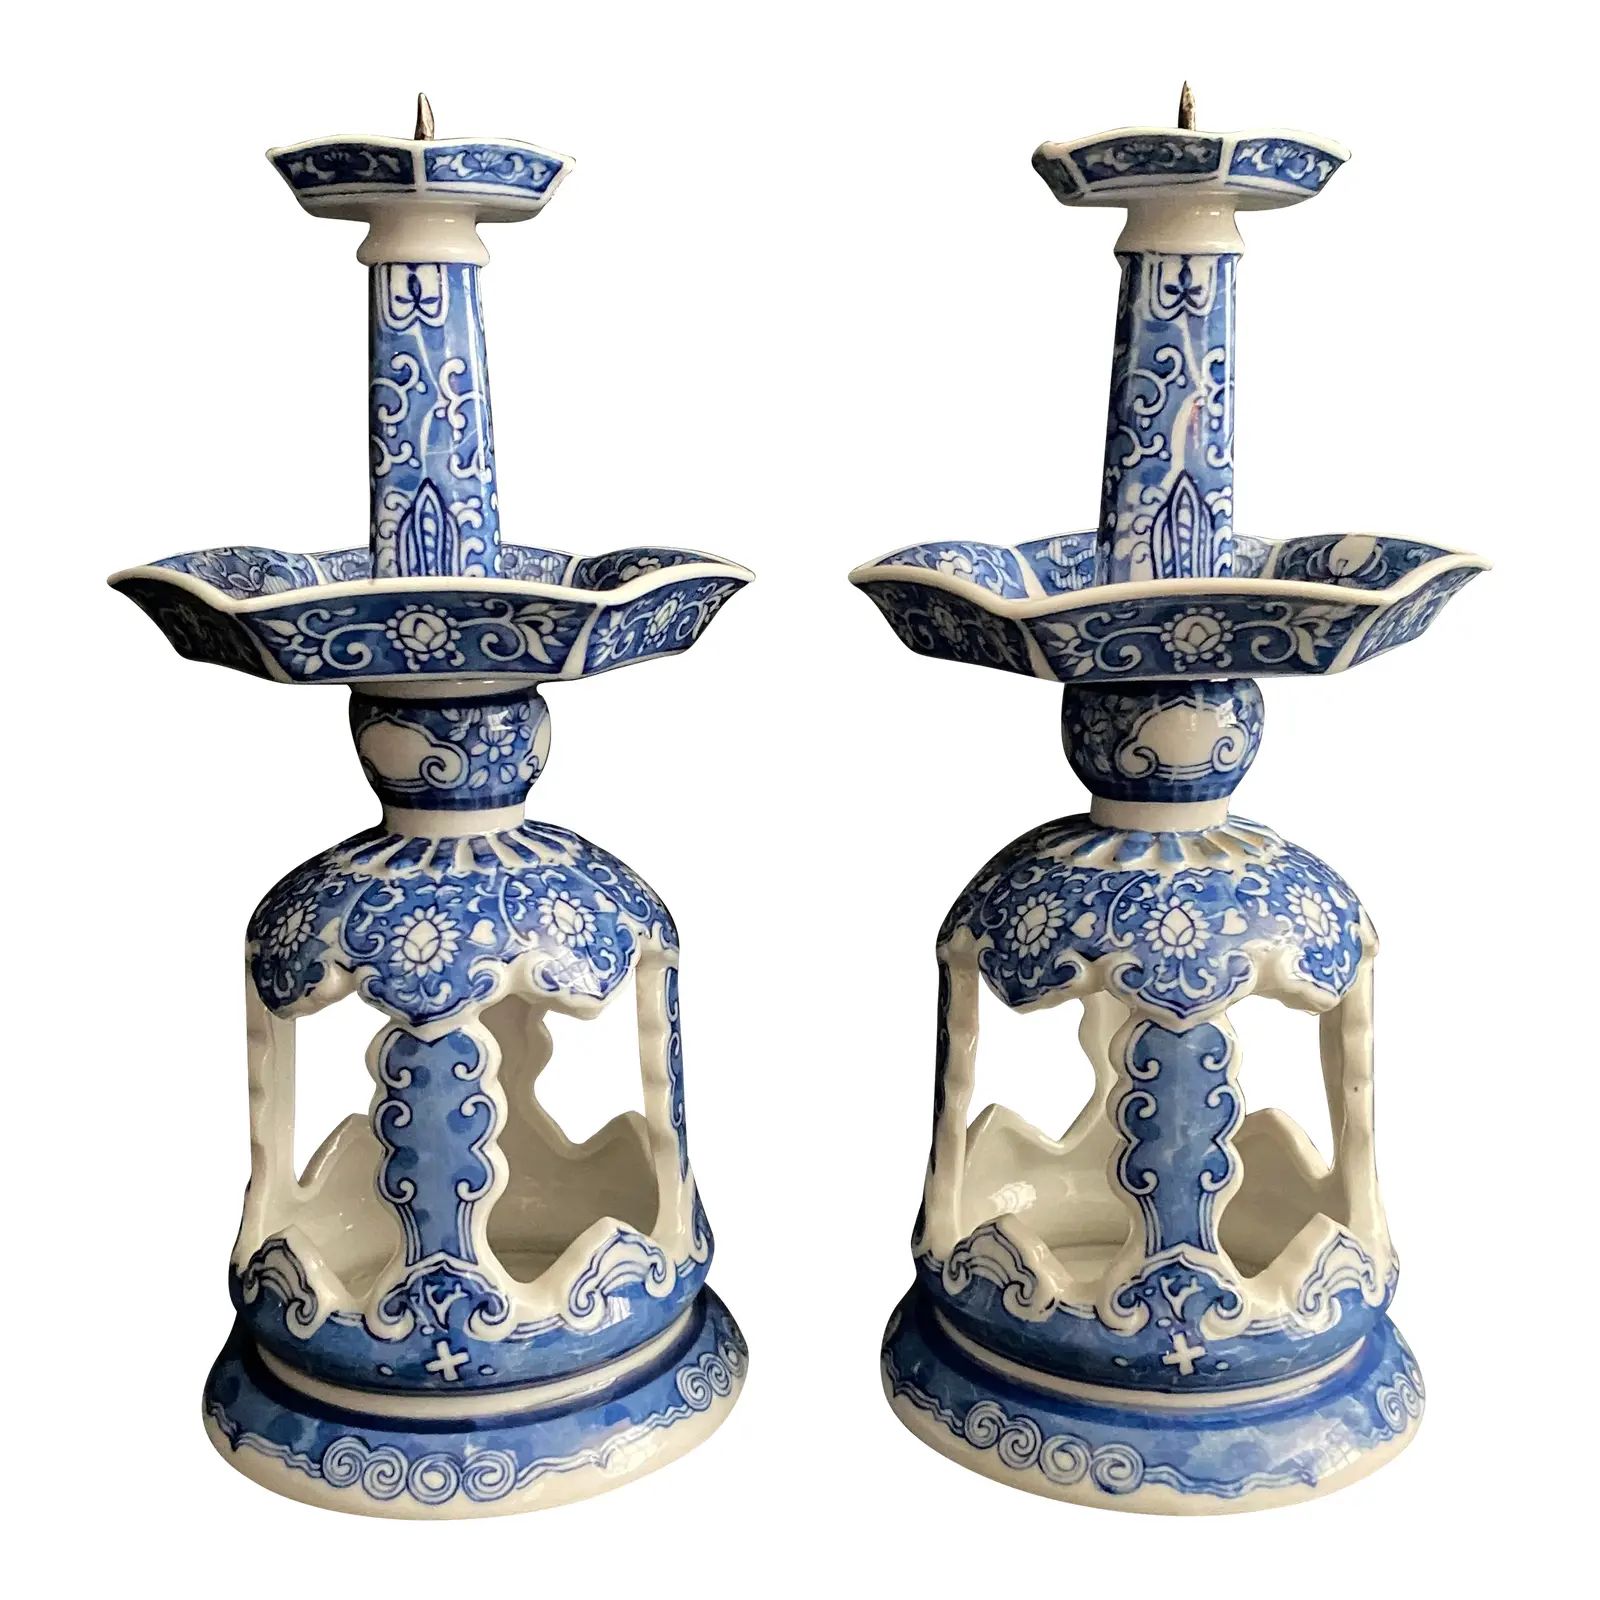 Vintage Pair of Chinese Pierced Porcelain Blue & White Candlesticks | Chairish